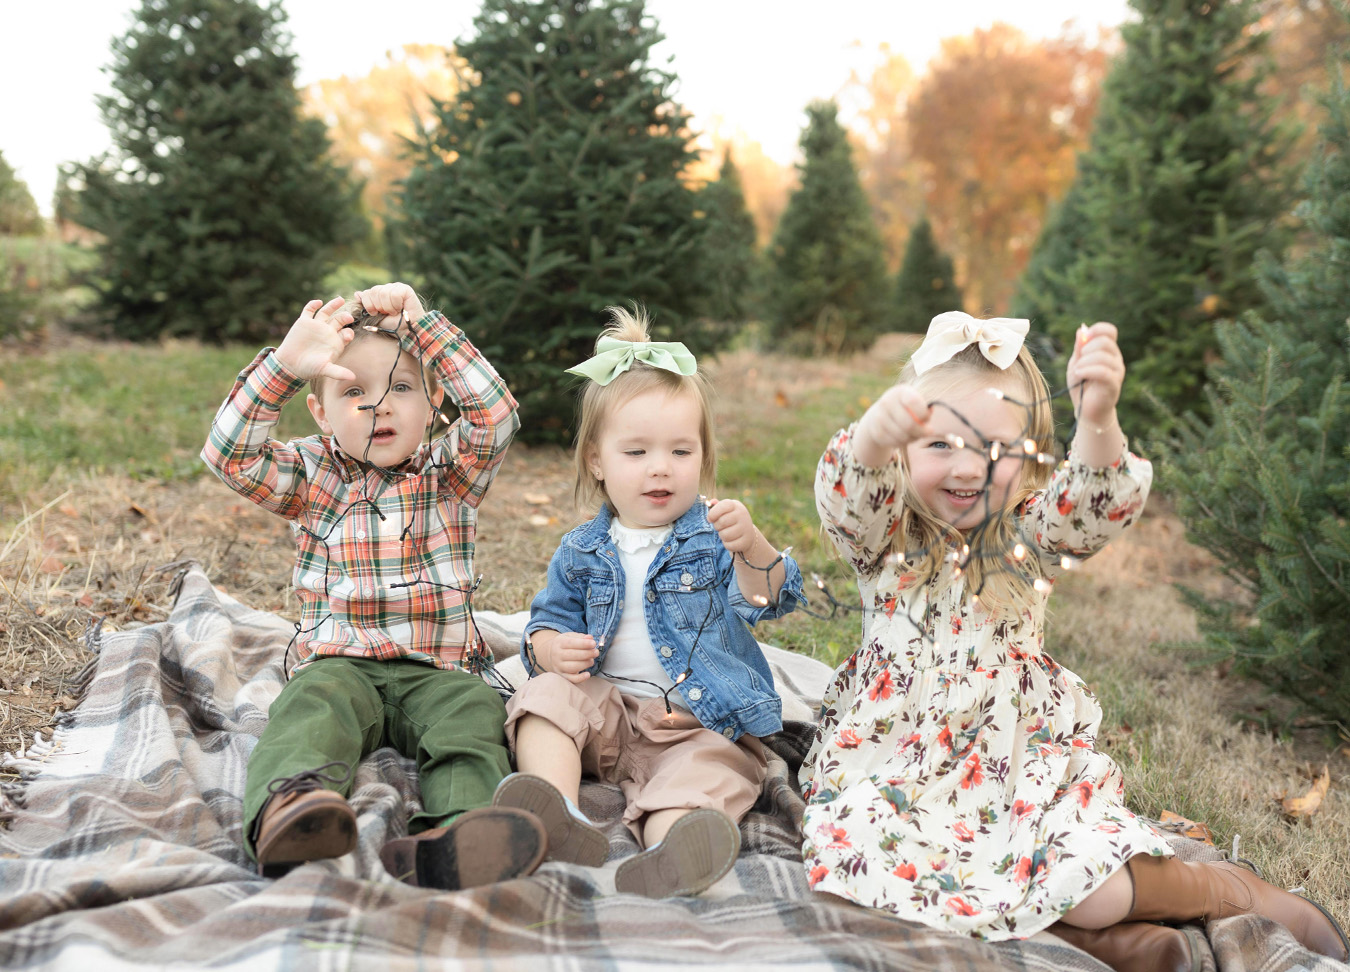 northern virginia family photographer captures three kids sitting on a blanket and playing with lights